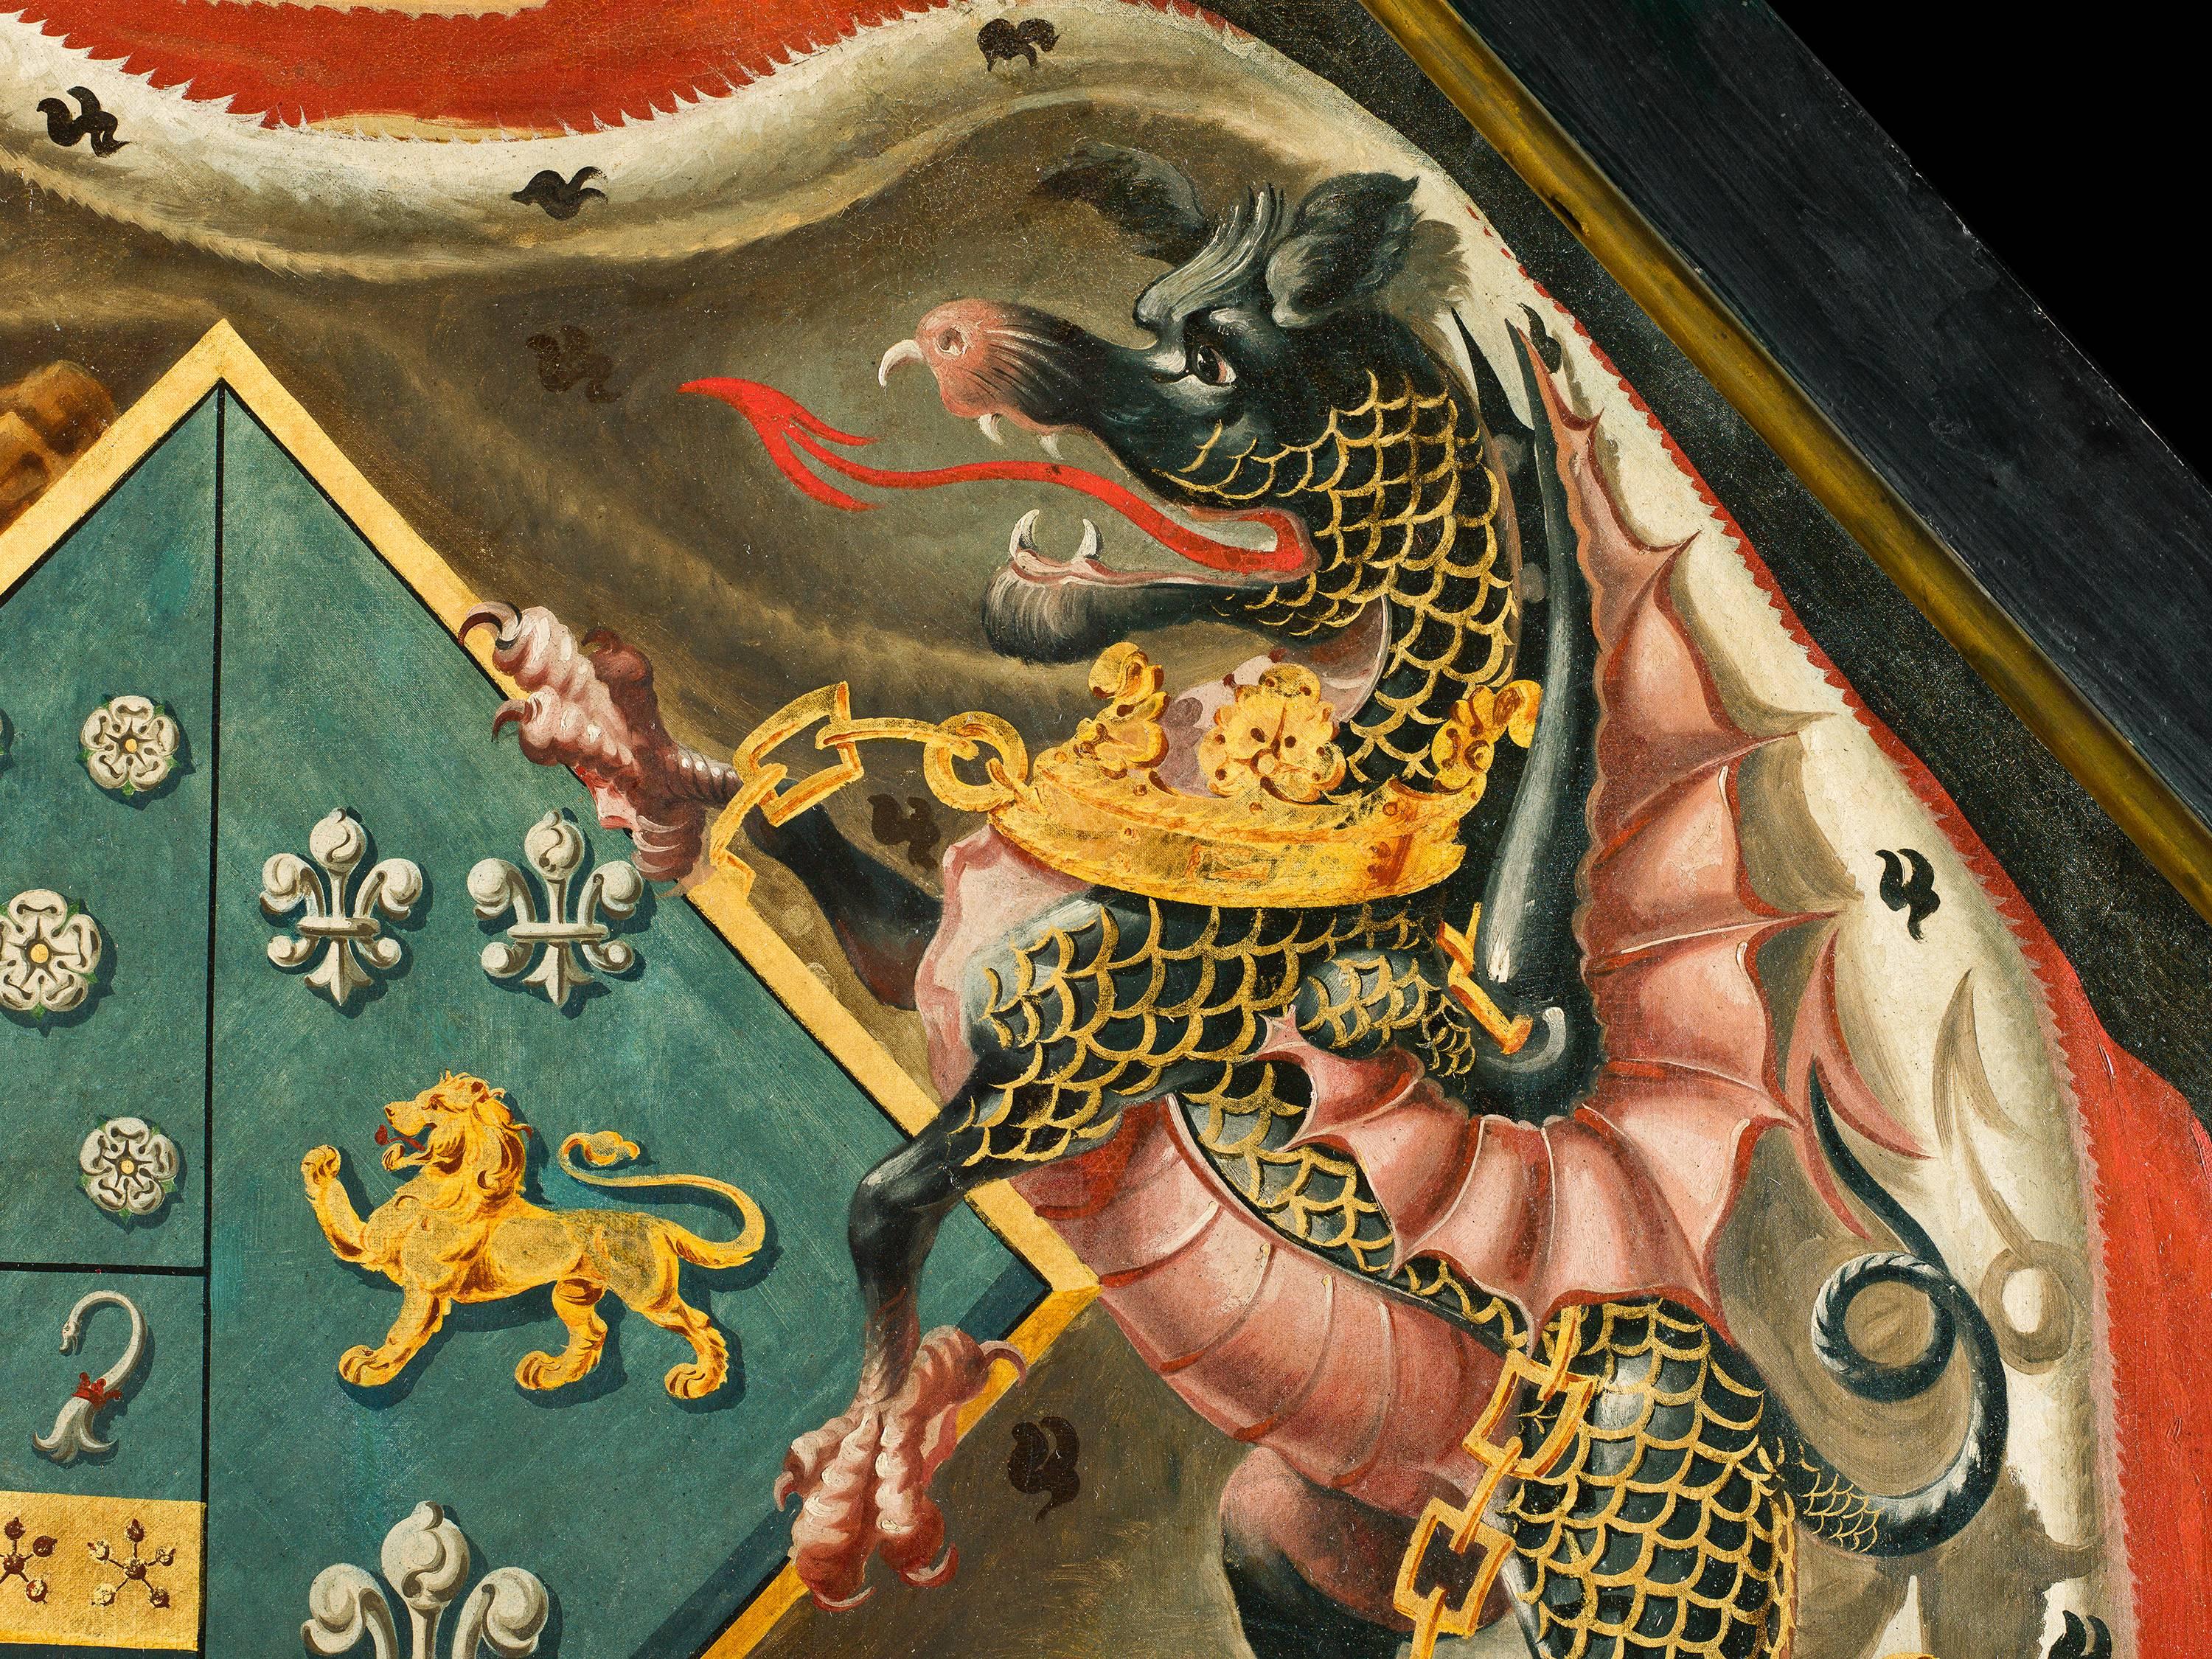 A large colorful 18th century armorial hatchment panel, oil on canvas from the 18th century. Of diamond form, showing a crown under which is draped an ermine-edged robe flanked by a lion and a black dragon, English, late 18th century.

Provenance: